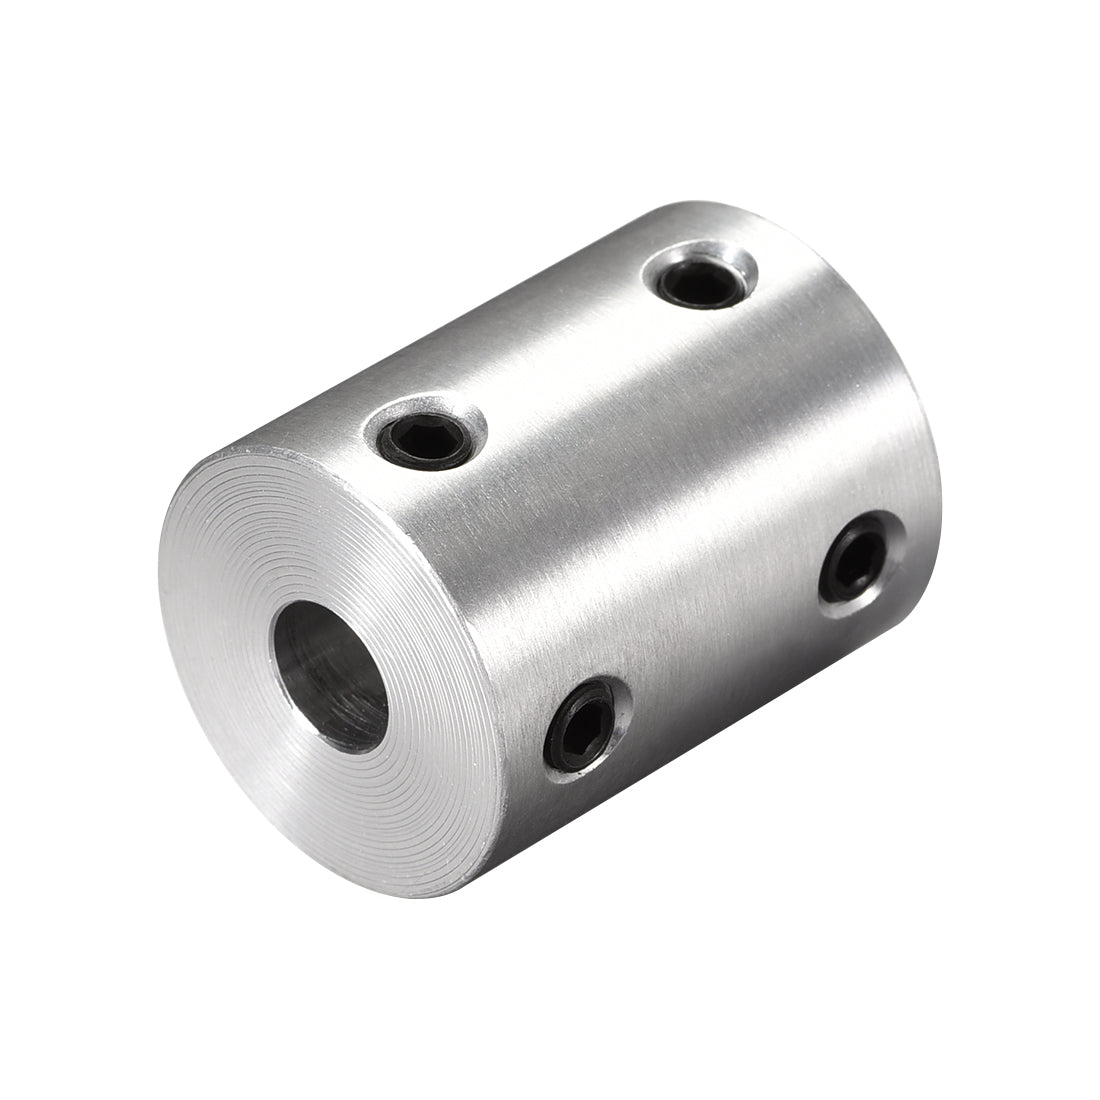 Uxcell Uxcell 6.35mm to 6.35mm Bore Rigid Coupling 25mm Length 19mm Diameter Aluminum Alloy Shaft Coupler Connector Silver